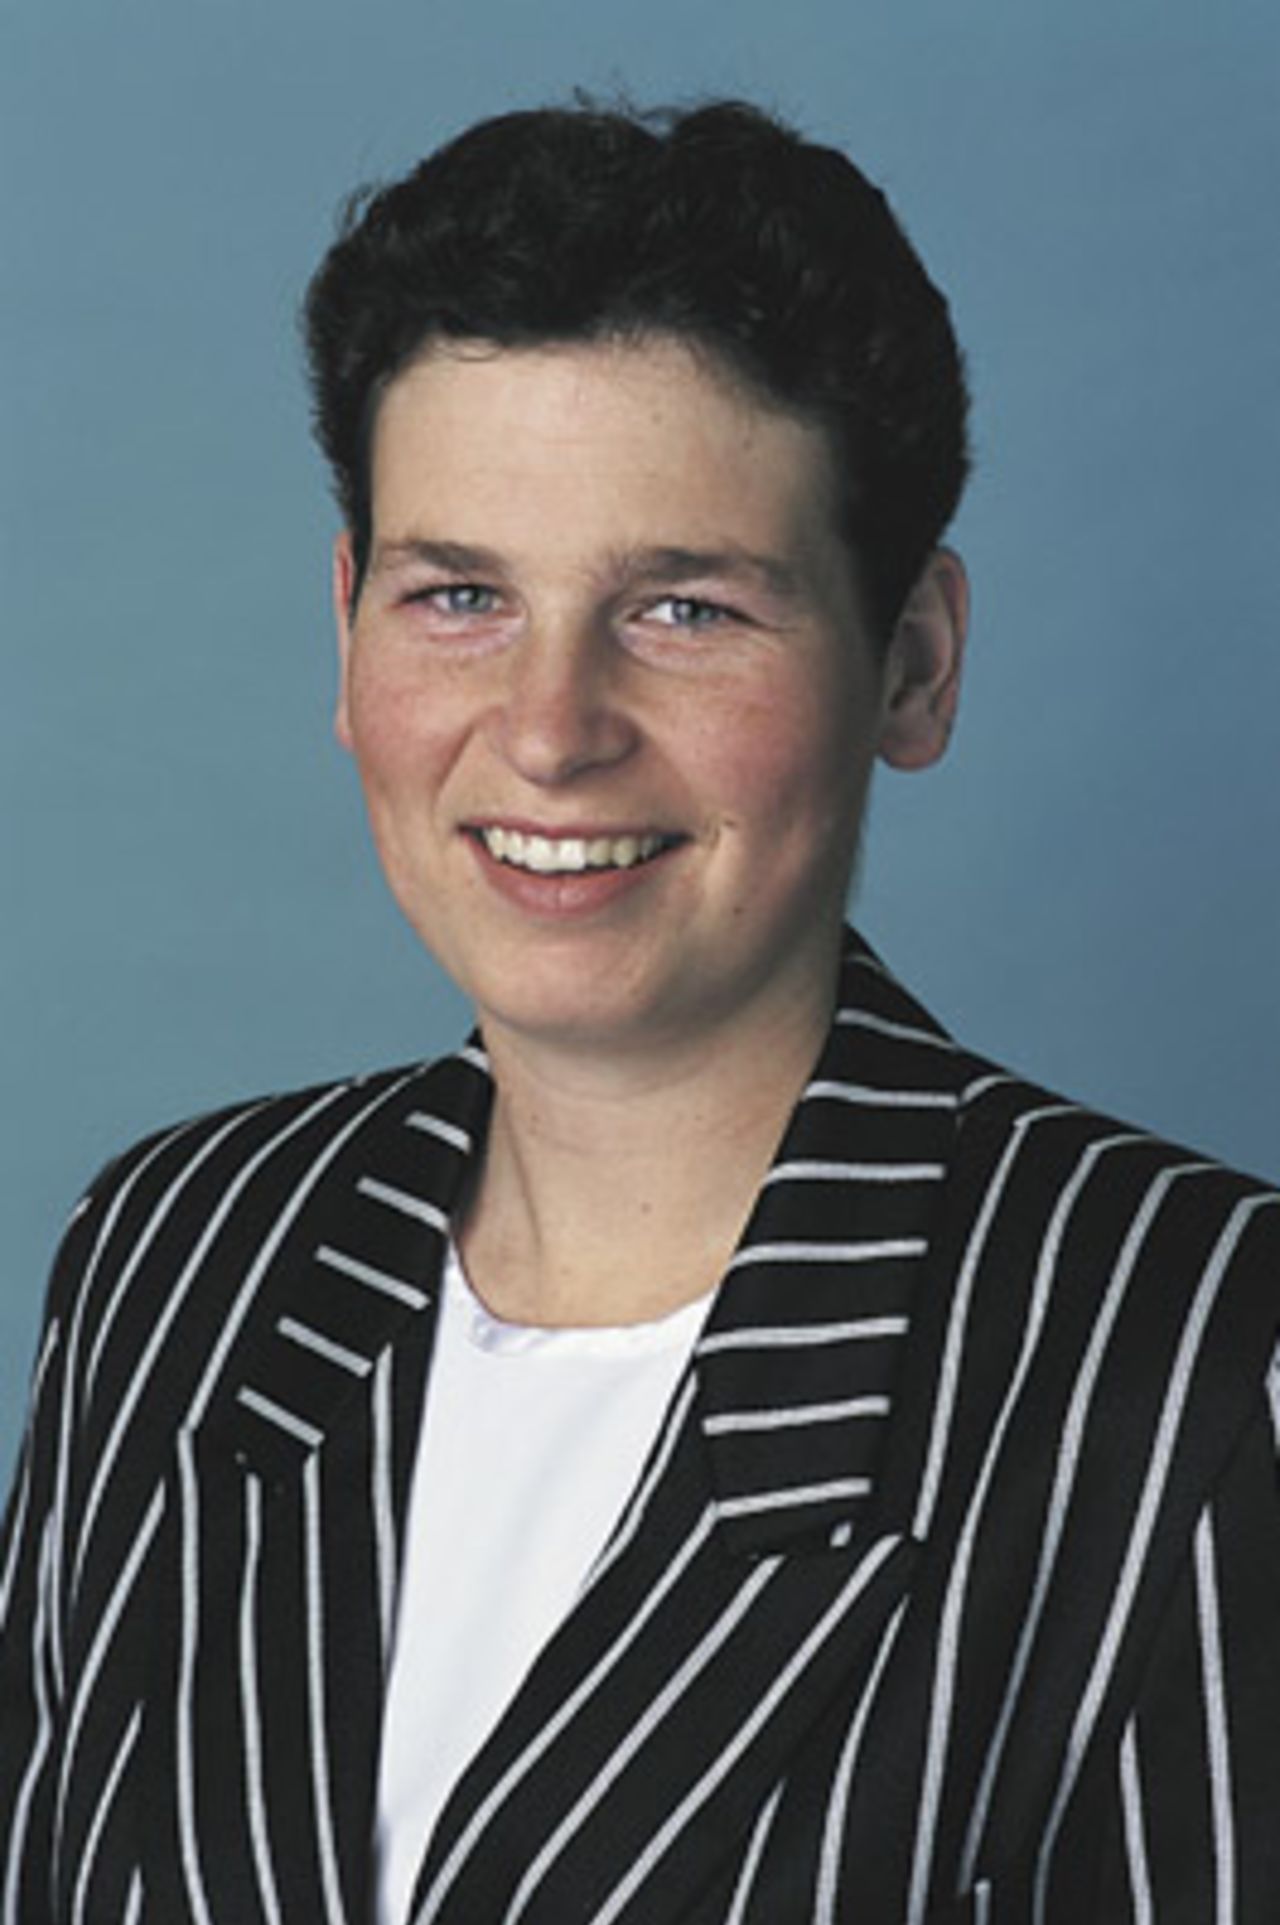 Portrait of Rachel Pullar, at Lincoln, July 2000 - New Zealand training squad member for the CricInfo Women's World Cup 2000